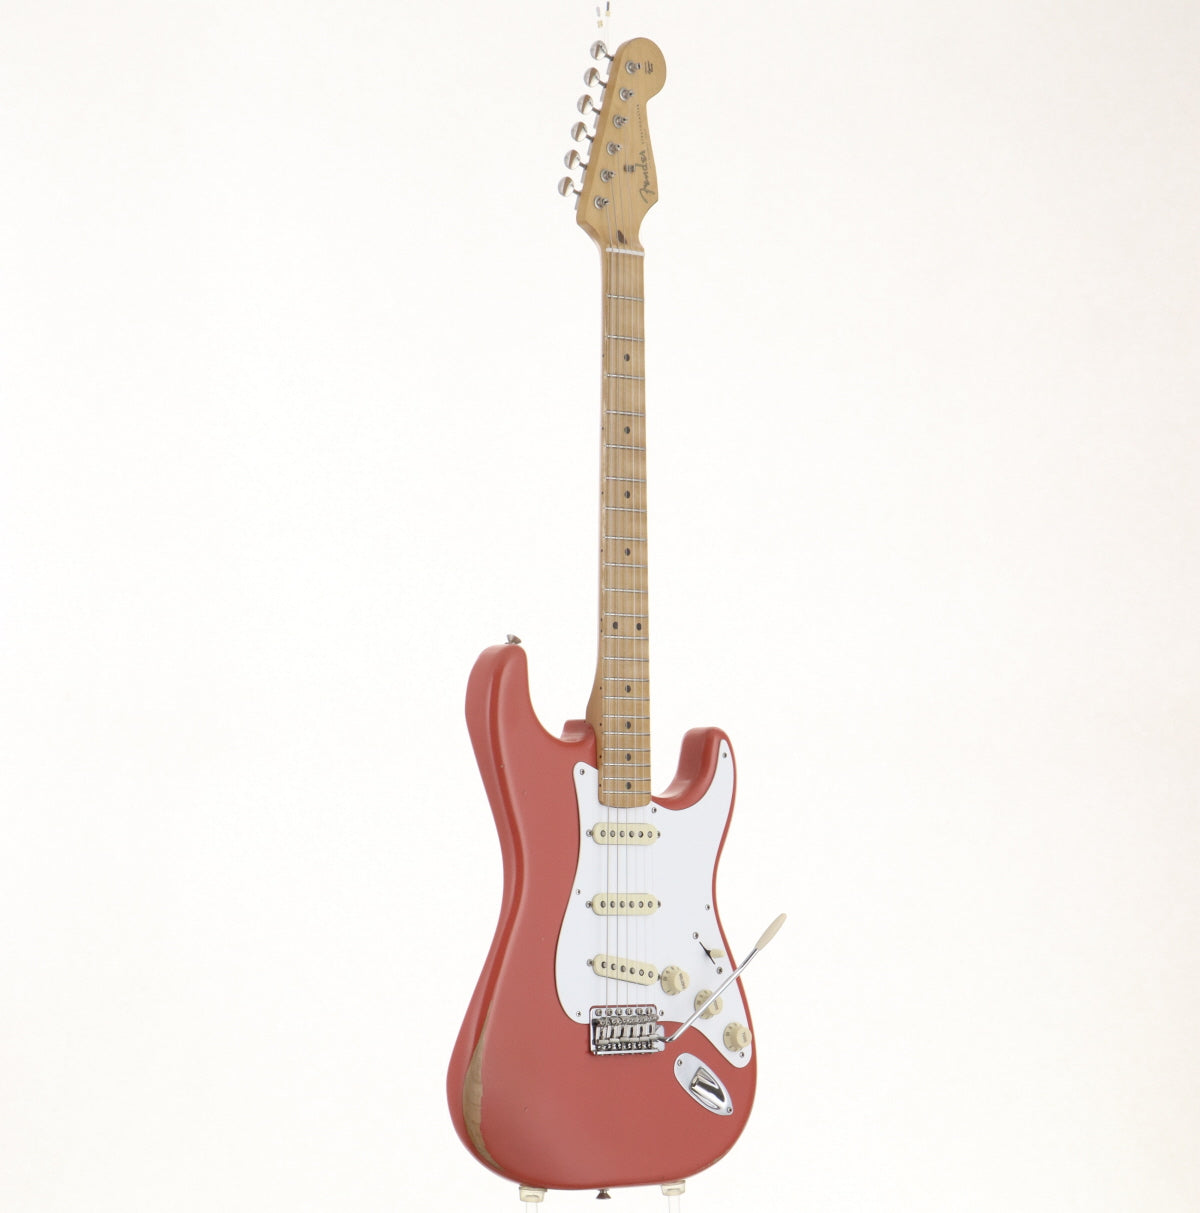 [SN MX21186164] USED Fender Mexico / Road Worn 50s Stratocaster Fiesta Red [03]